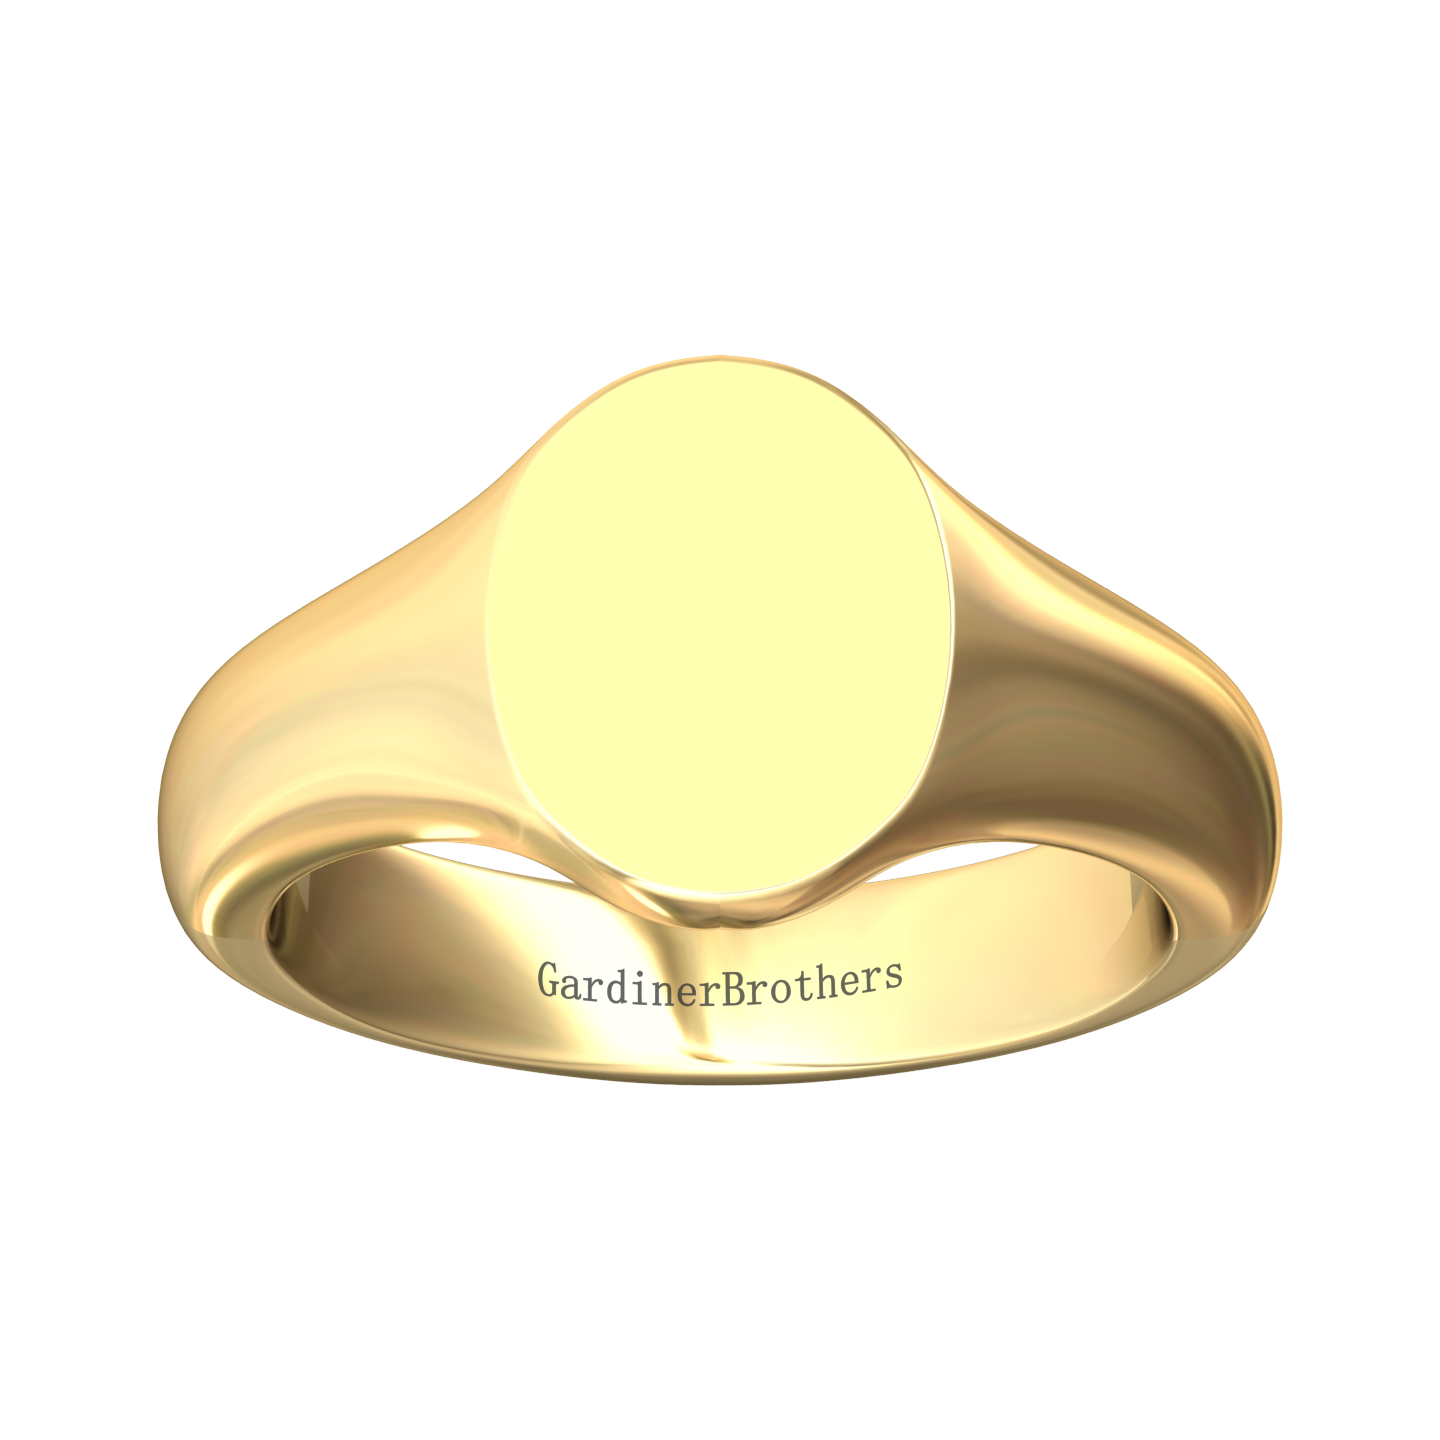 Oval Signet Ring 11x9mm  Gardiner Brothers   